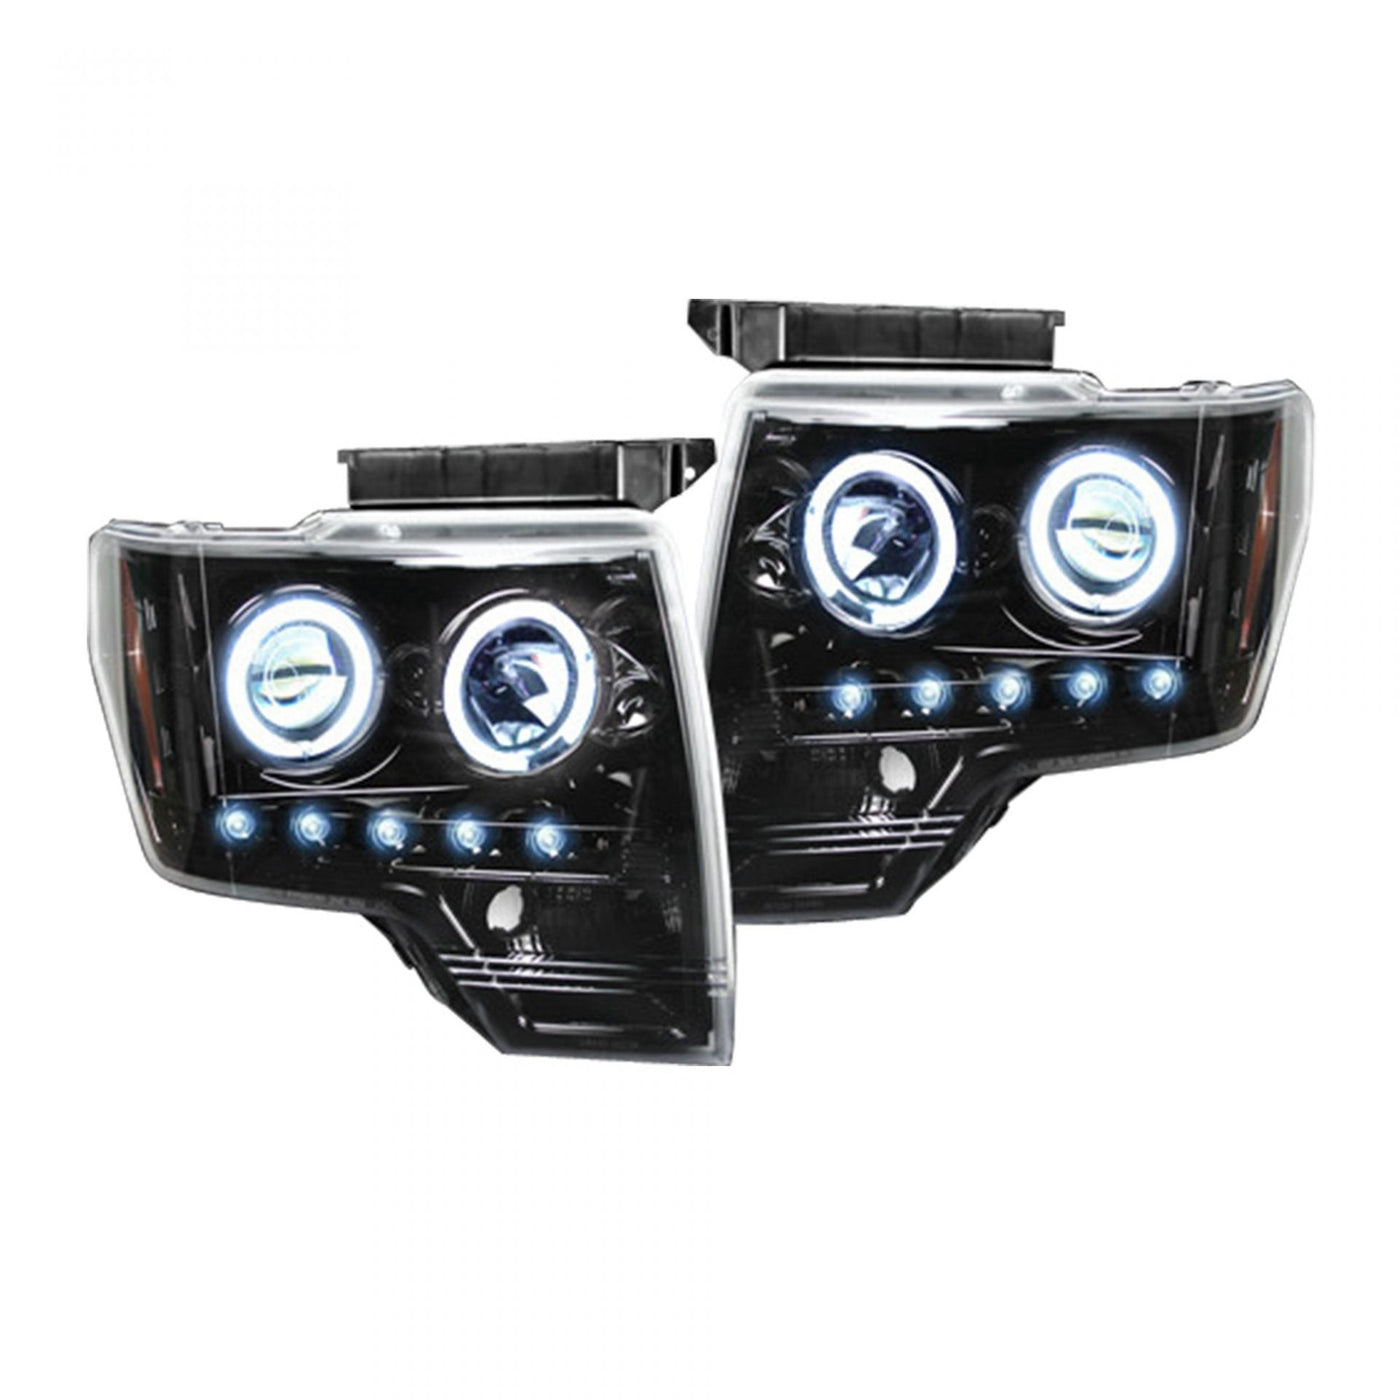 Ford Projector Headlights, F150 Projector Headlights, F150 09-14 Projector Headlights, Smoked/Black  Headlights, Recon Projector Headlights